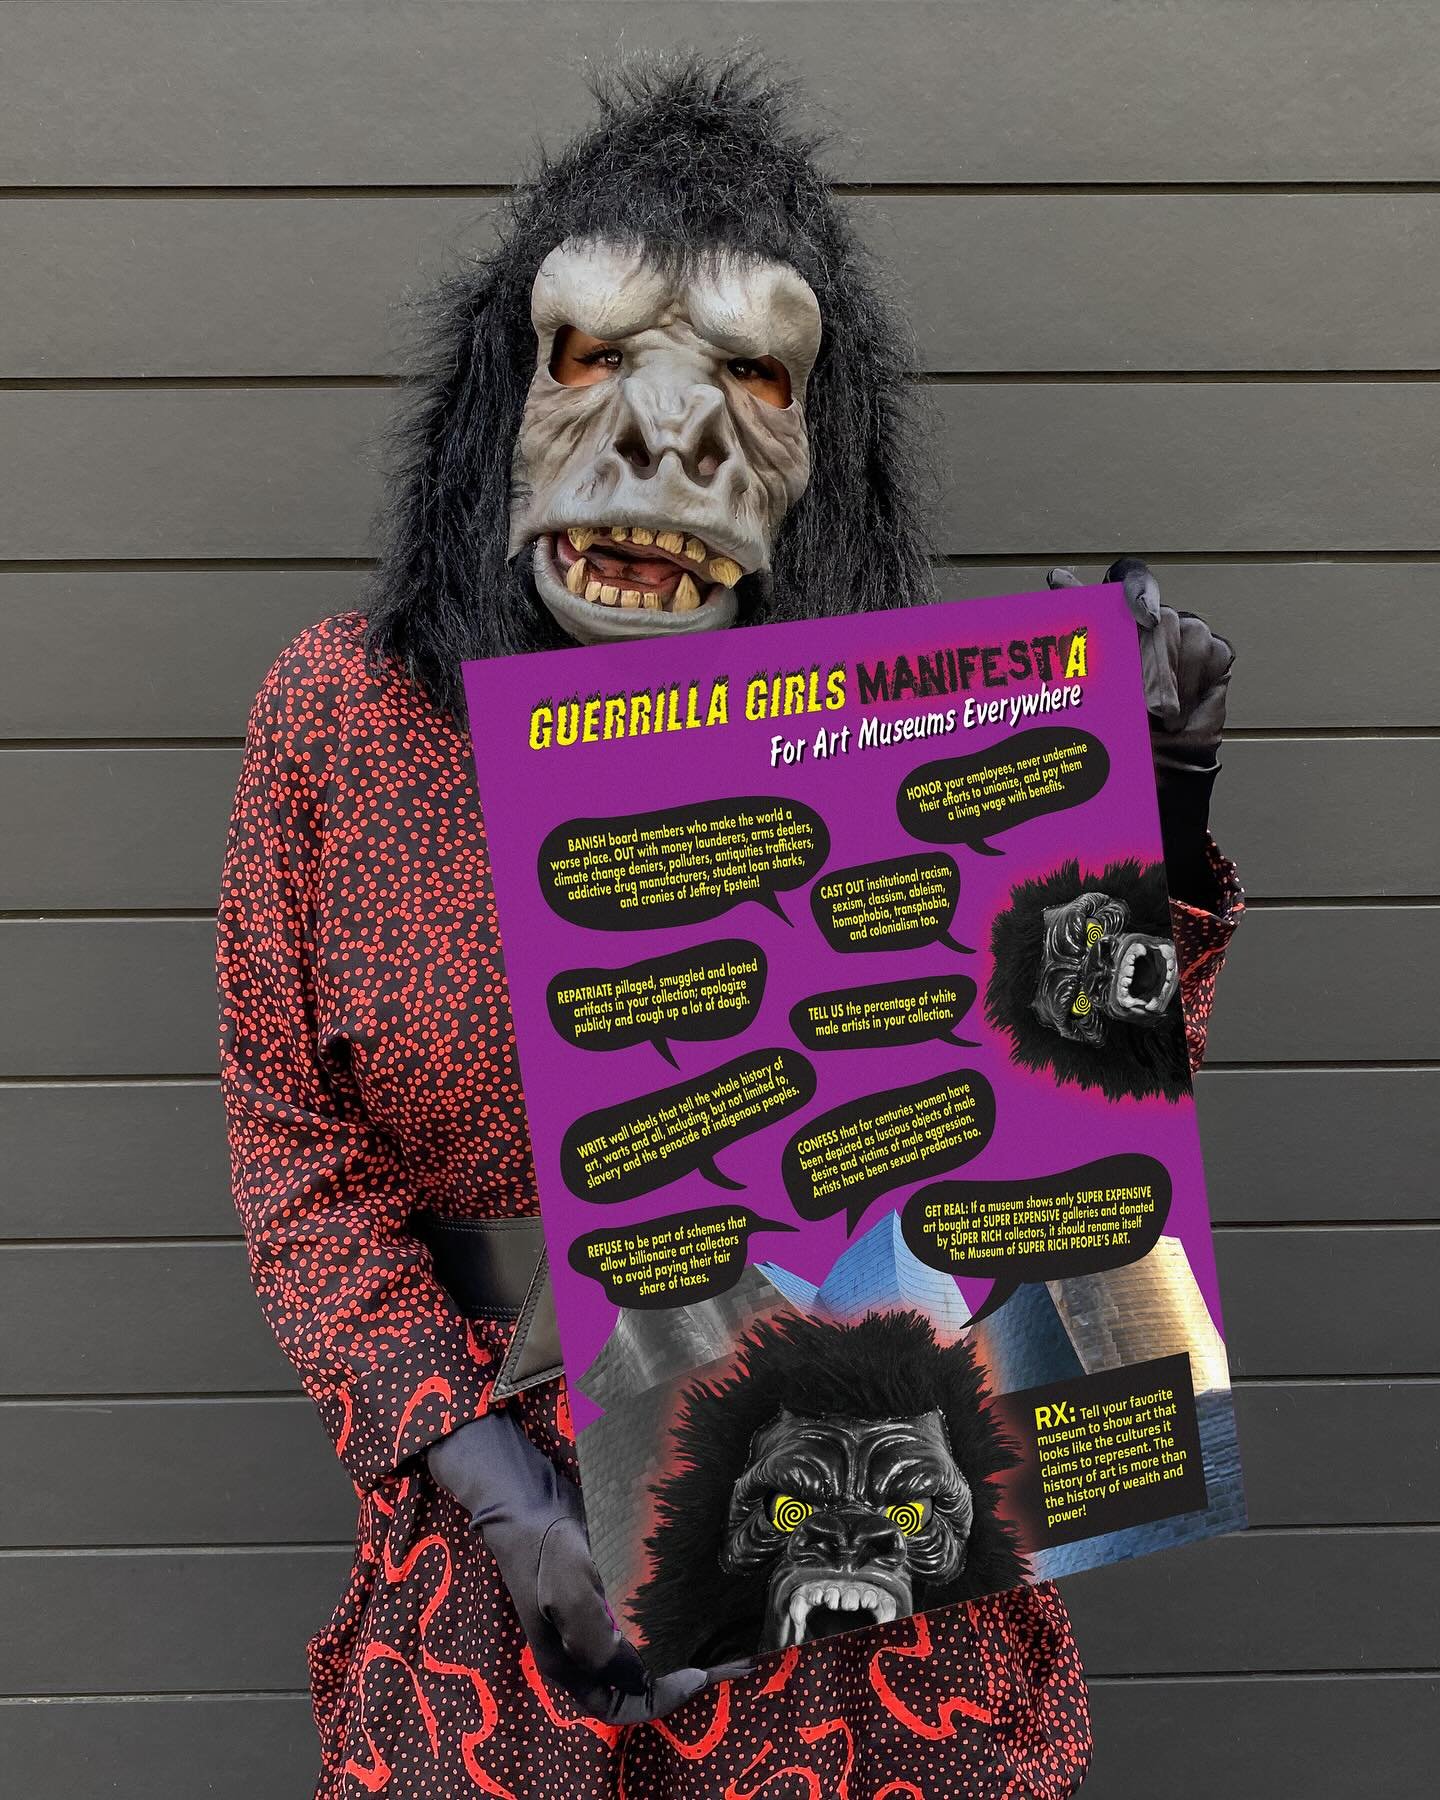 This is not the Guerrilla Girls Manifesto It&rsquo;s our ManifestA - and a message to museums everywhere!

Get a free poster download @wepresent !!

#guerrillagirls 
#wepresent